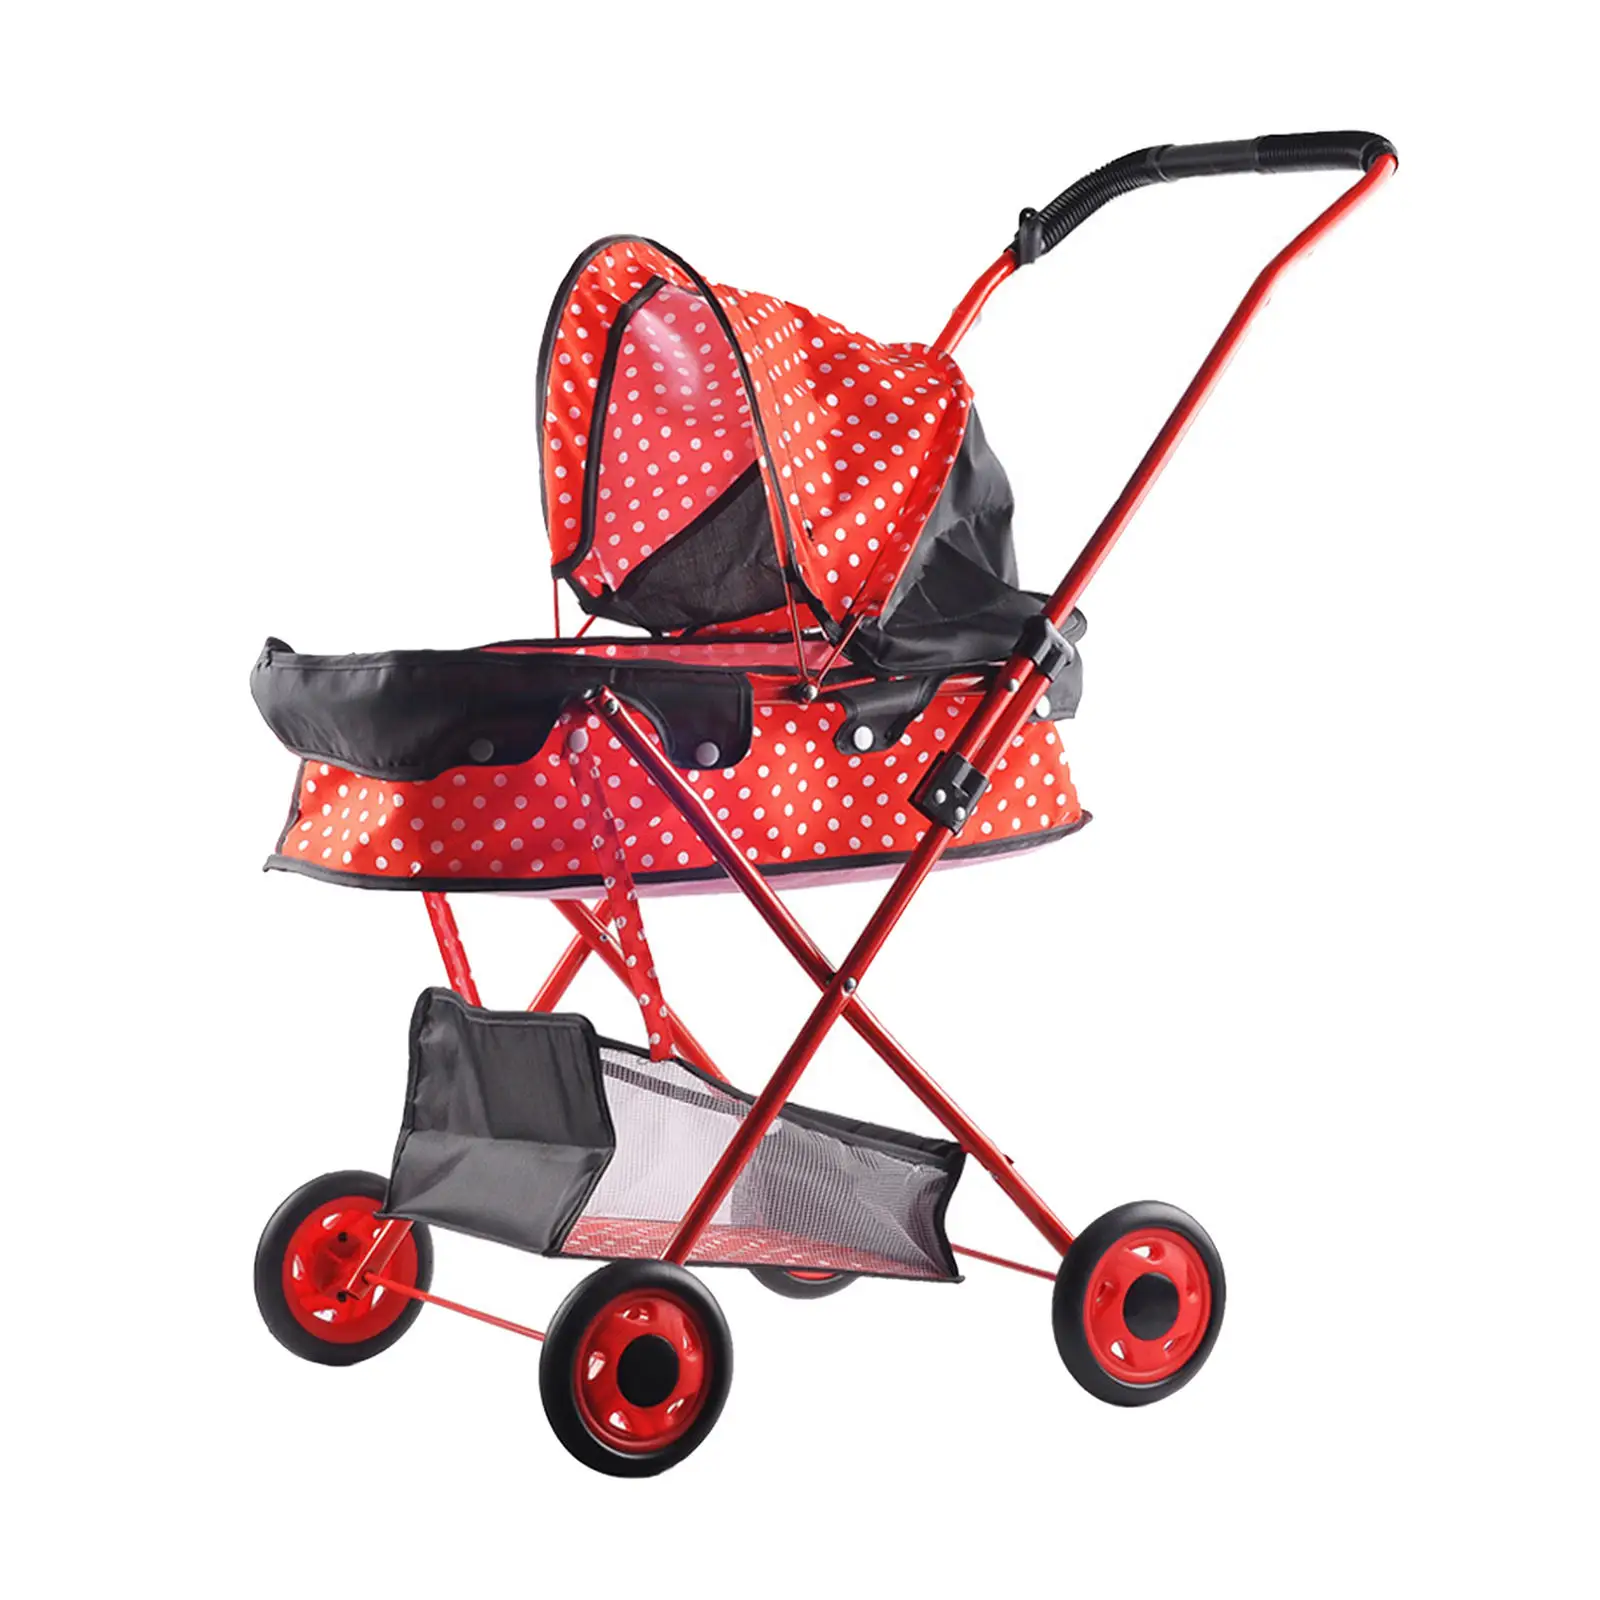 Dots Foldable Doll Stroller with Hood Pram Doll Carrier Kids Pretend Play Simulation Pushchair Toy Dollhouse Decoration